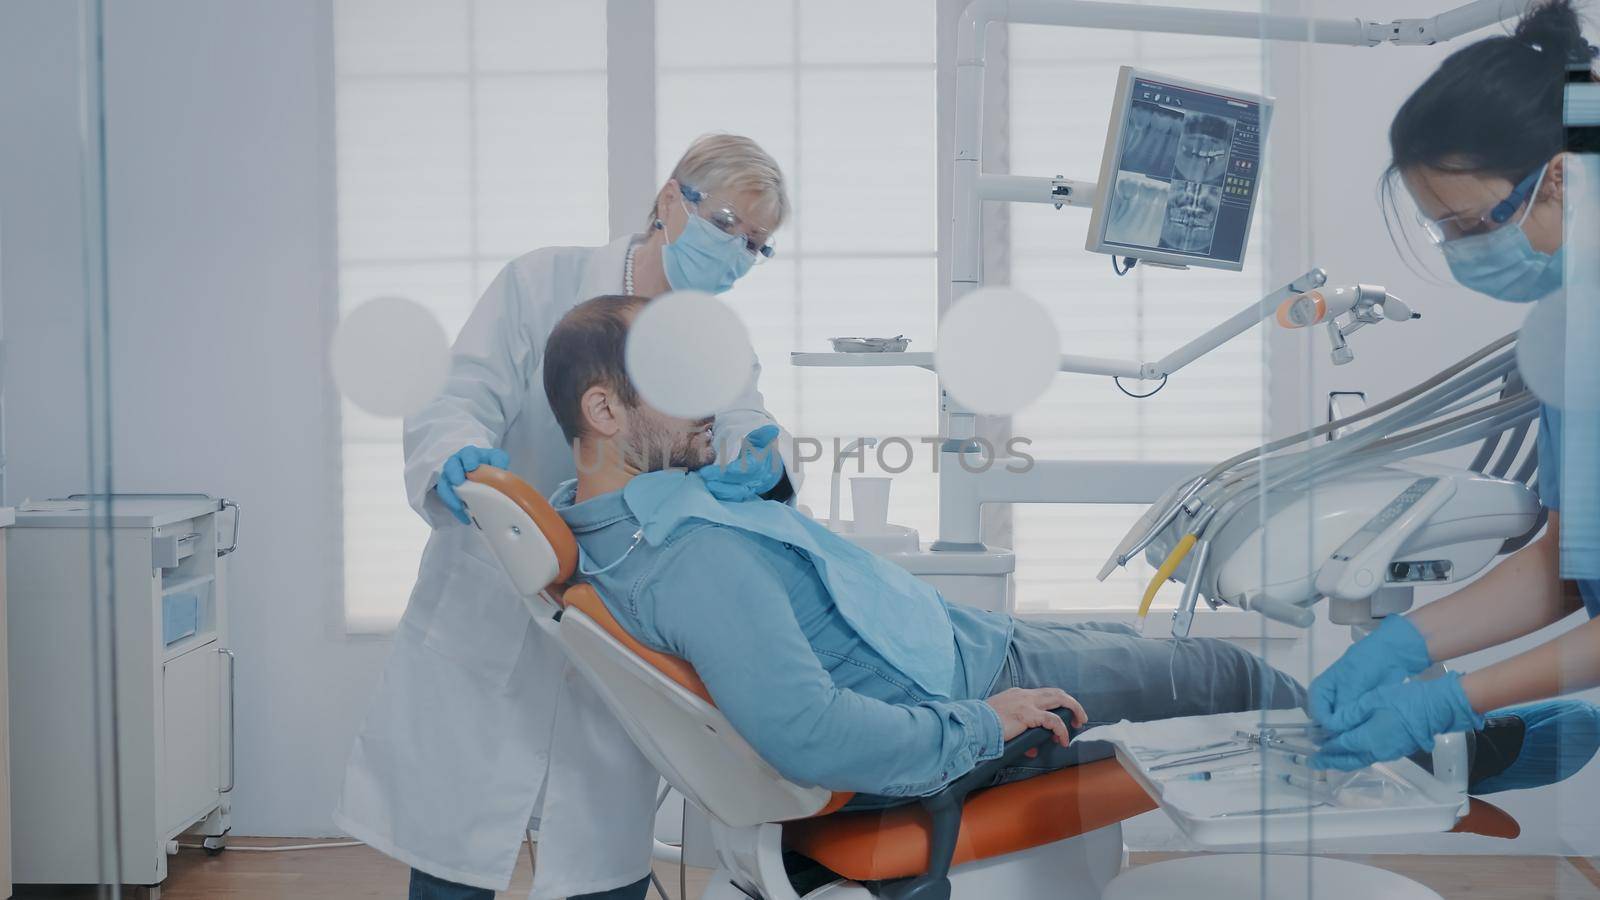 Stomatologist examining patient with mouth open in cabinet by DCStudio